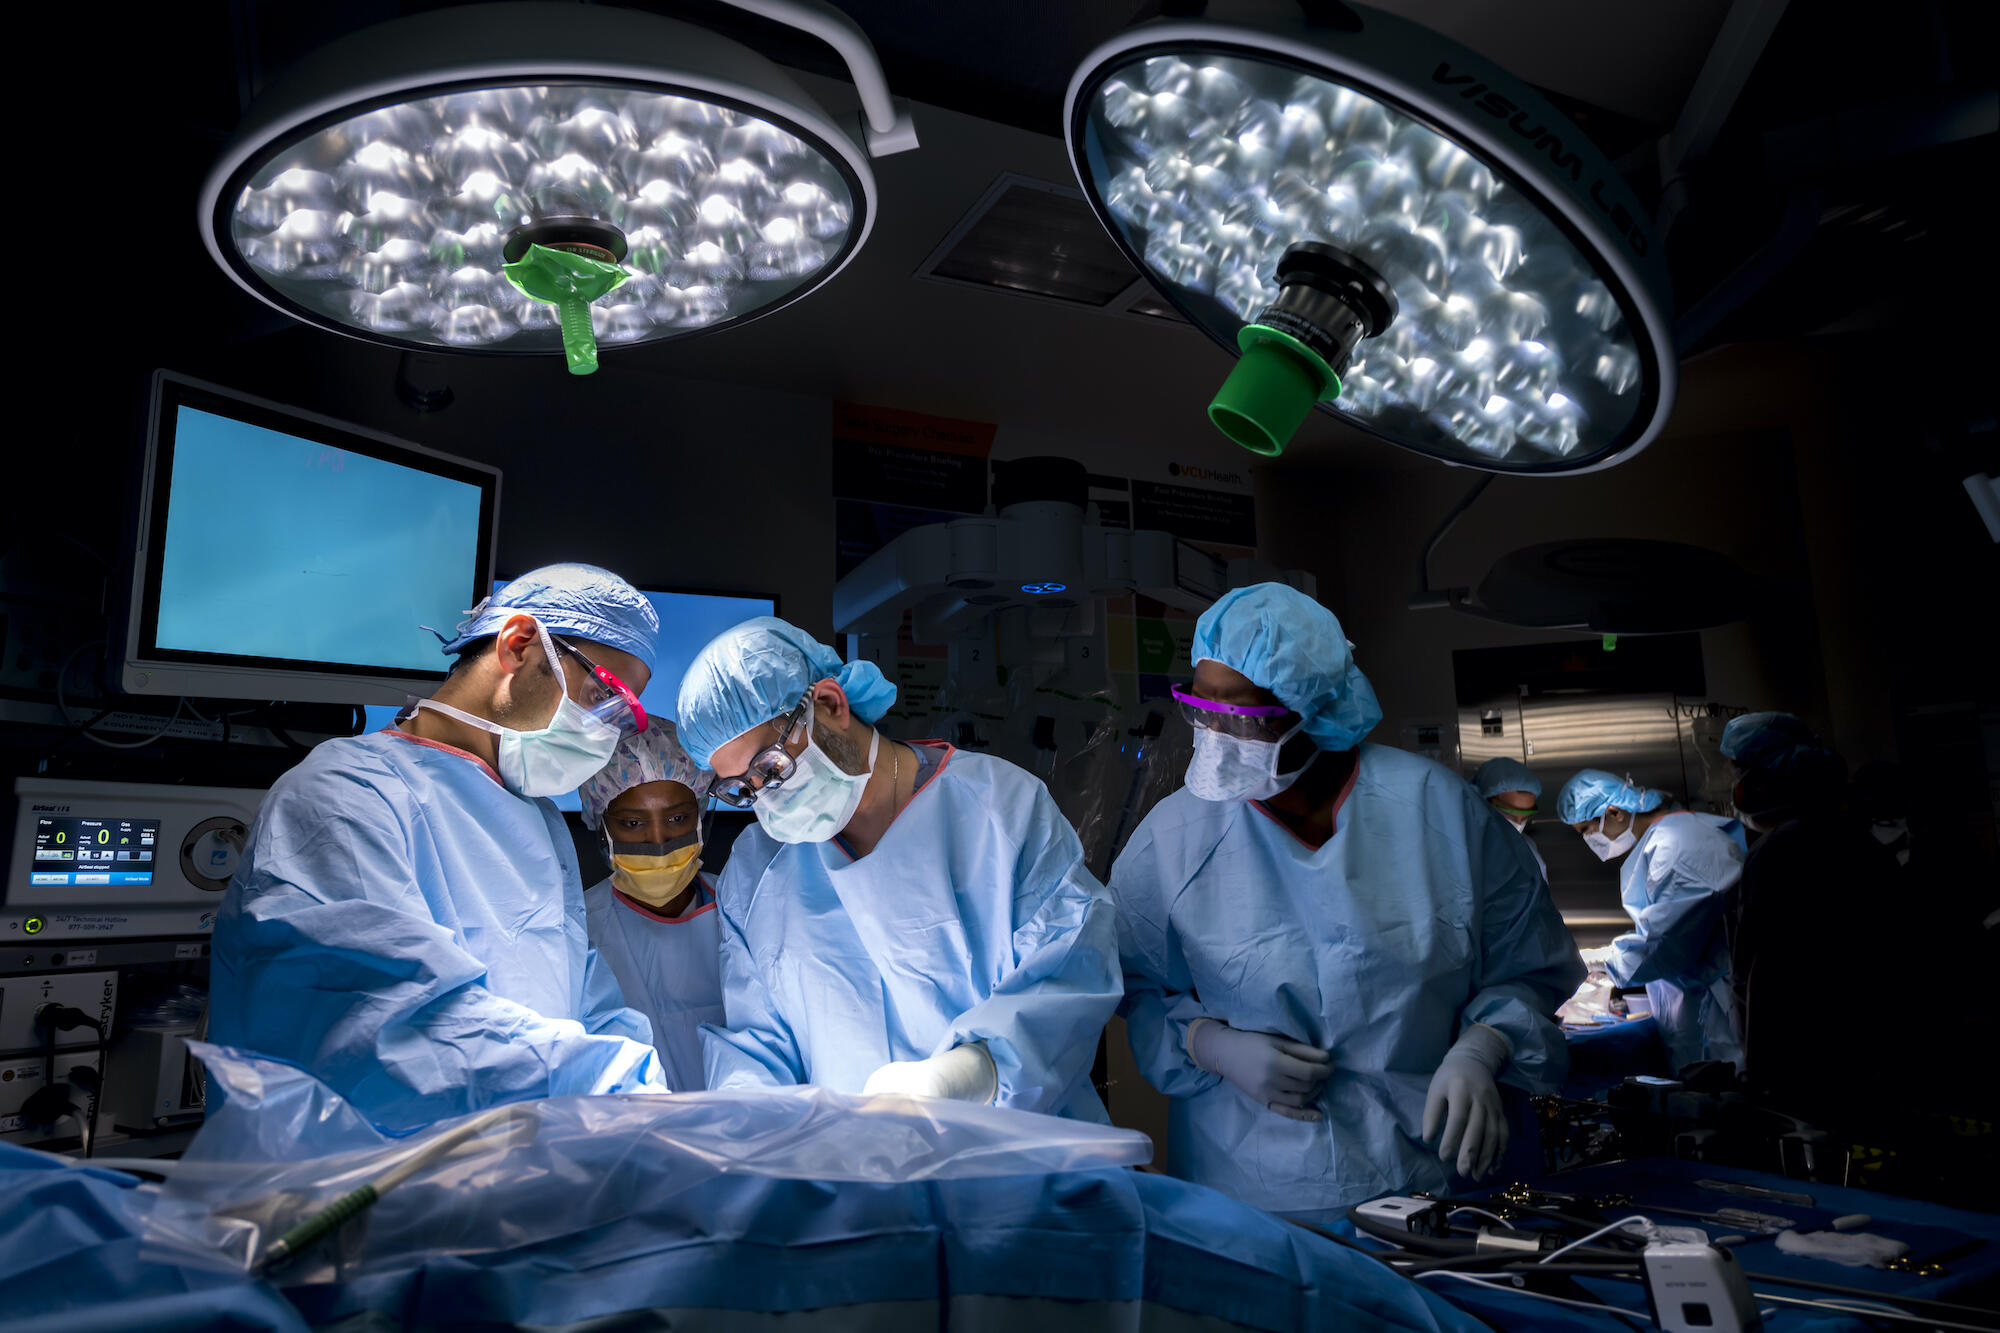 Four people in scrubs perform surgery.